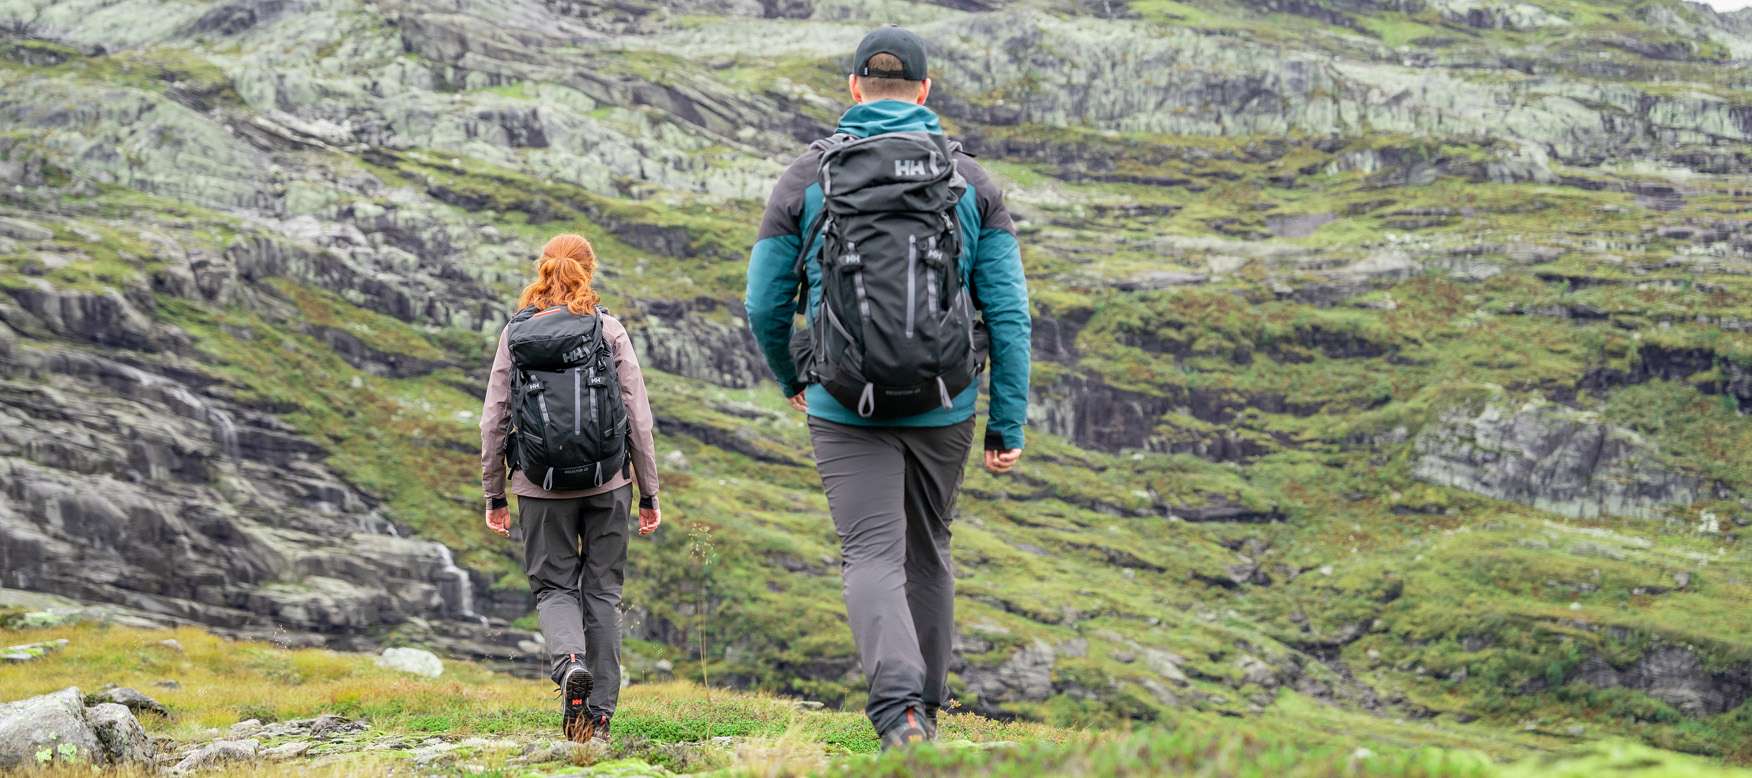 Man and woman hiking in the 45L Transistor backpacks.